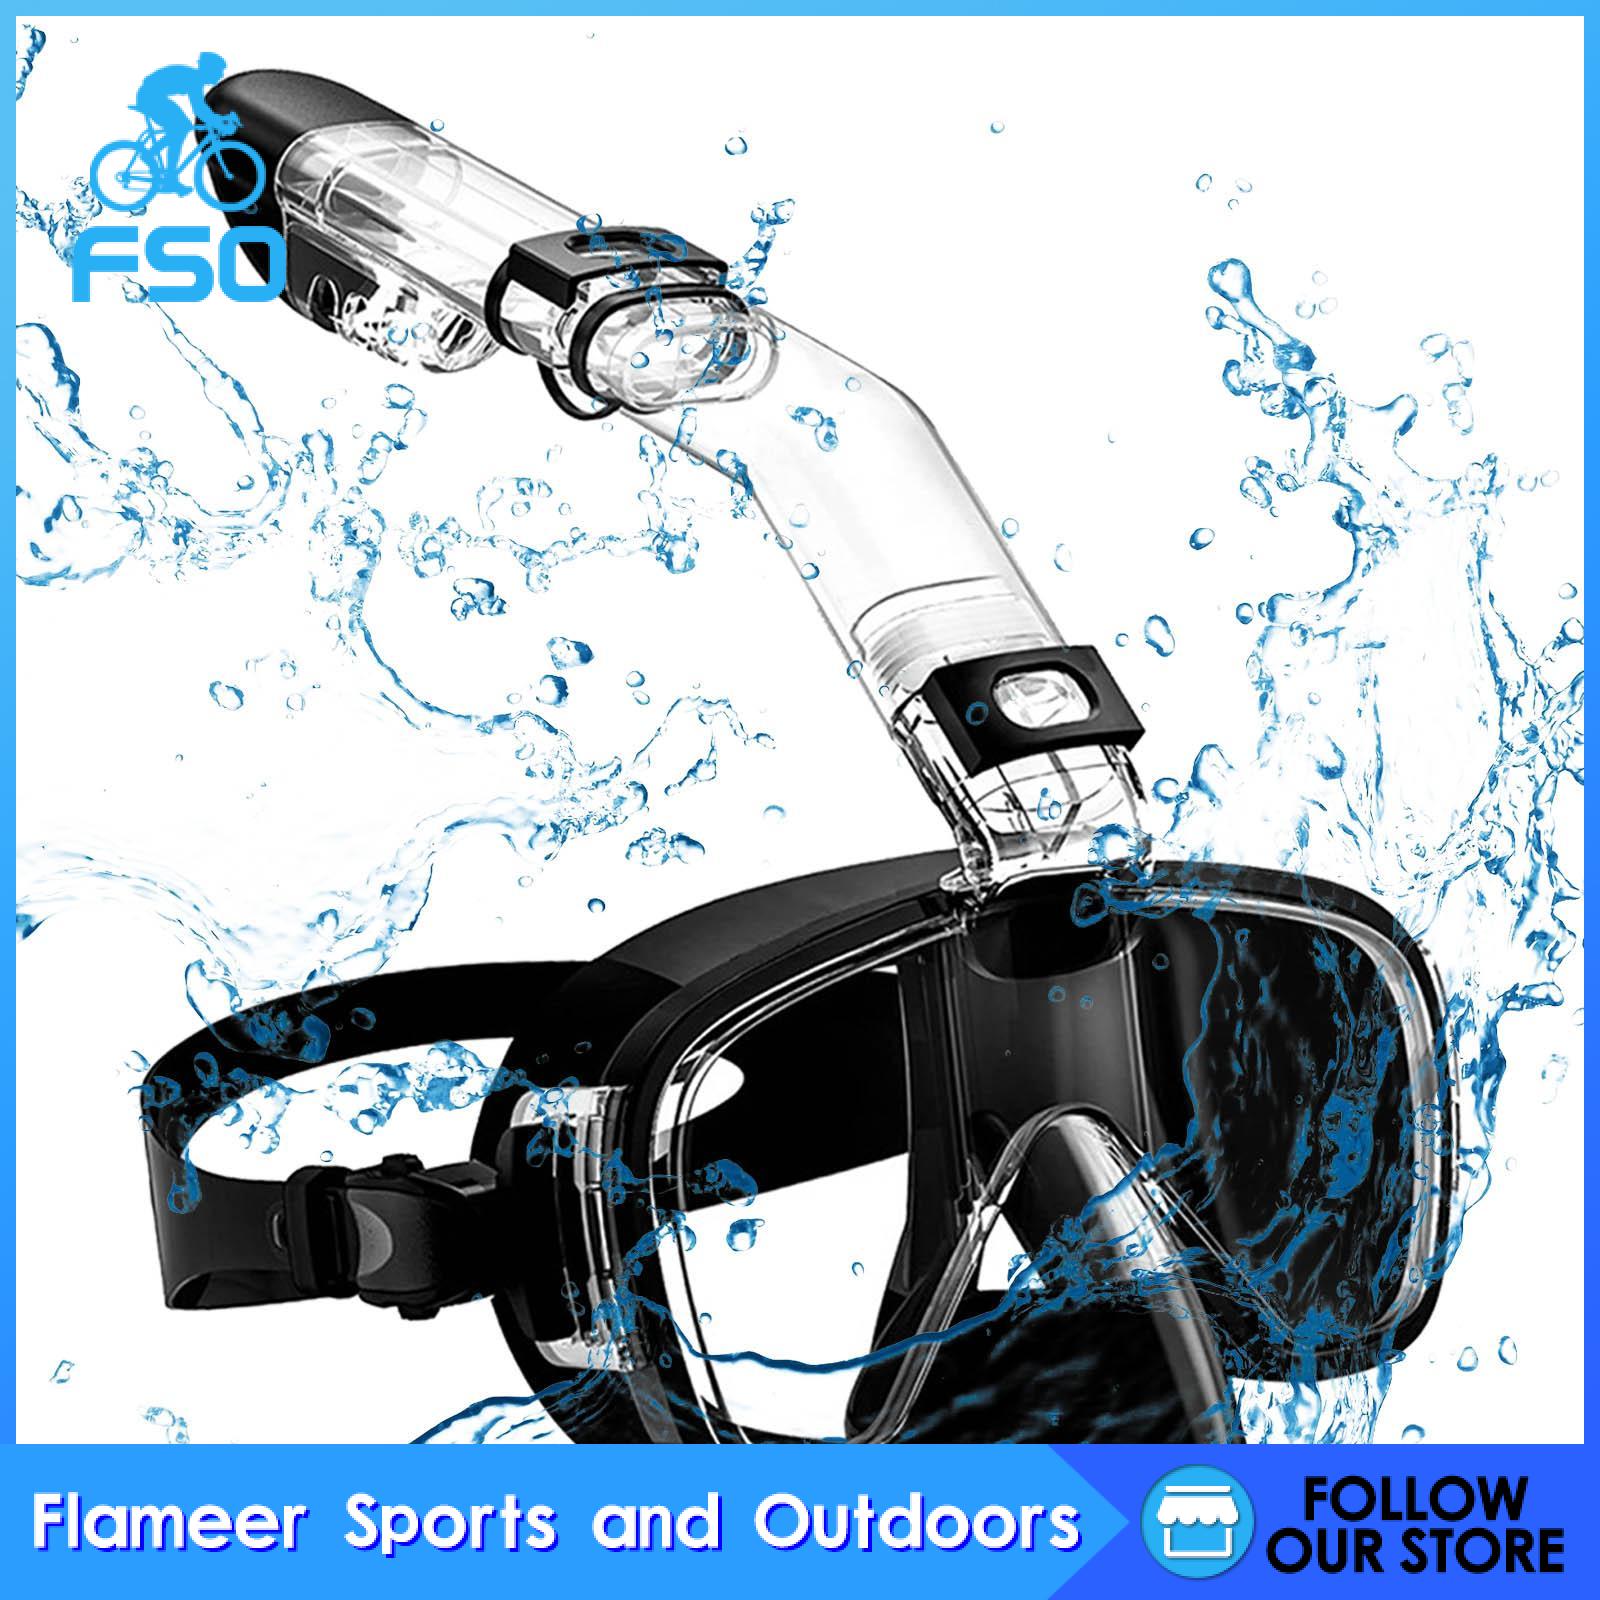 Flameer Scuba Diving Mask Scuba Mask Wide View Clear View Snorkel Mask